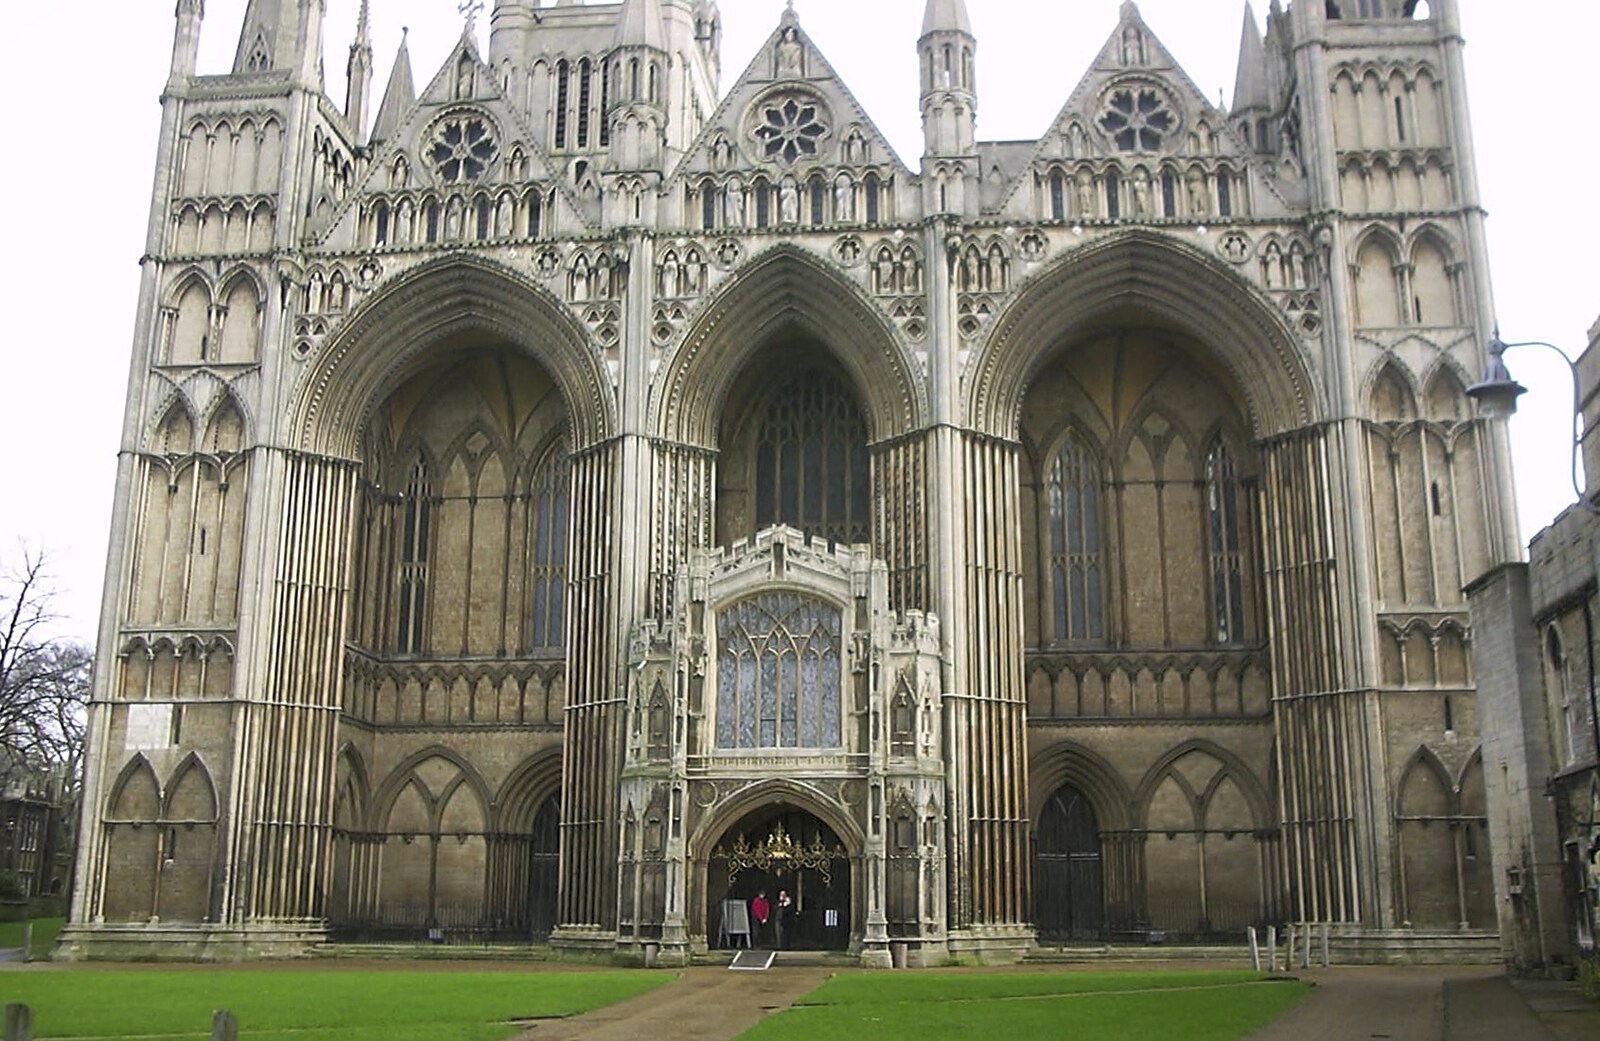 The impressive portico of Peterborough Cathedral from Longview, Easyworld and Peterborough Cathedral, Cambridgeshire - 10th February 2003